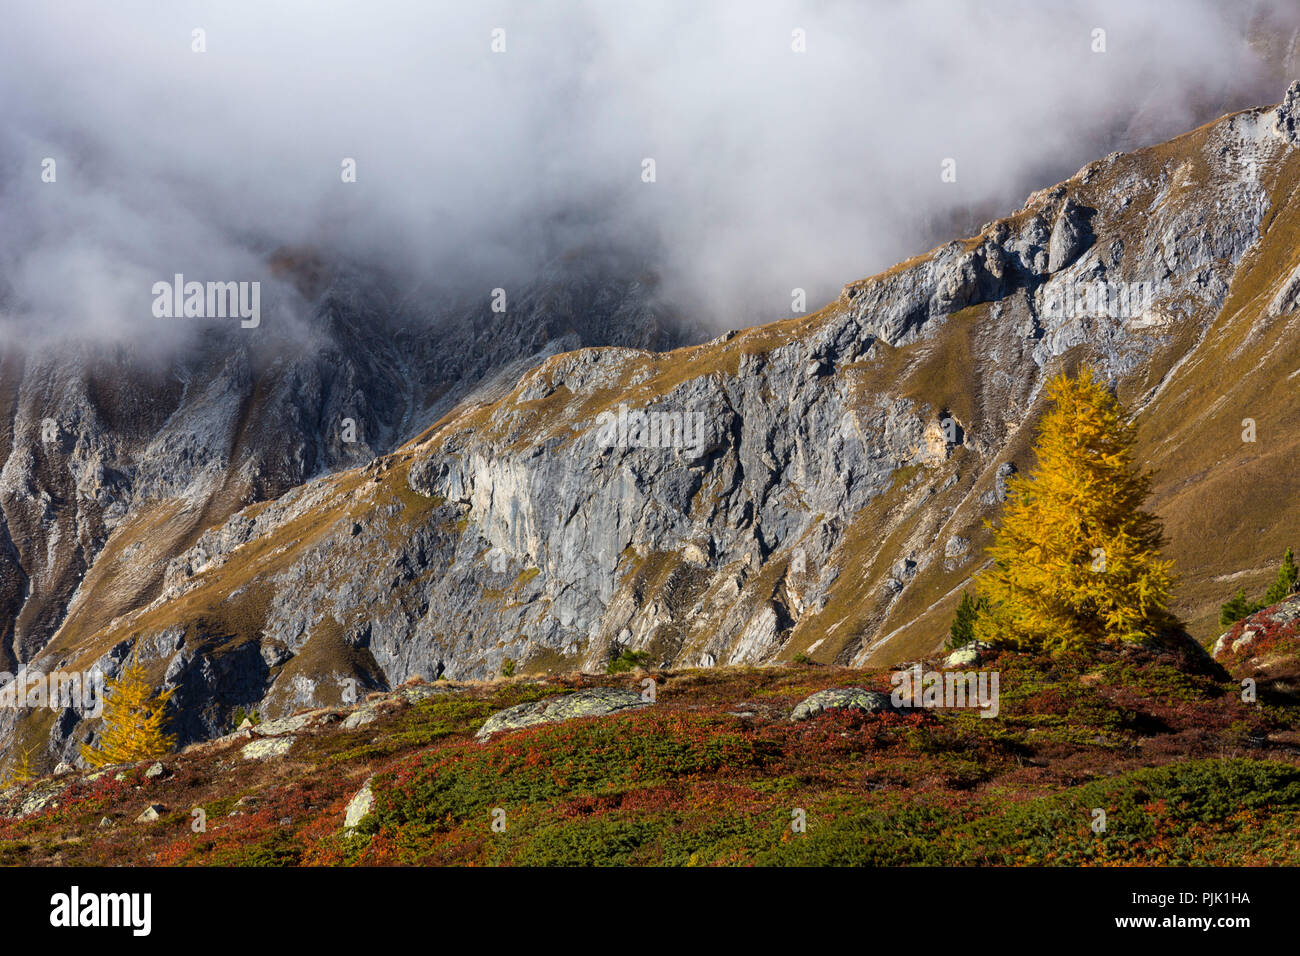 Autumn at 2300 meters above sea level at the Crap Alv Laiets on the Albula Pass, canton of Grisons, Switzerland Stock Photo